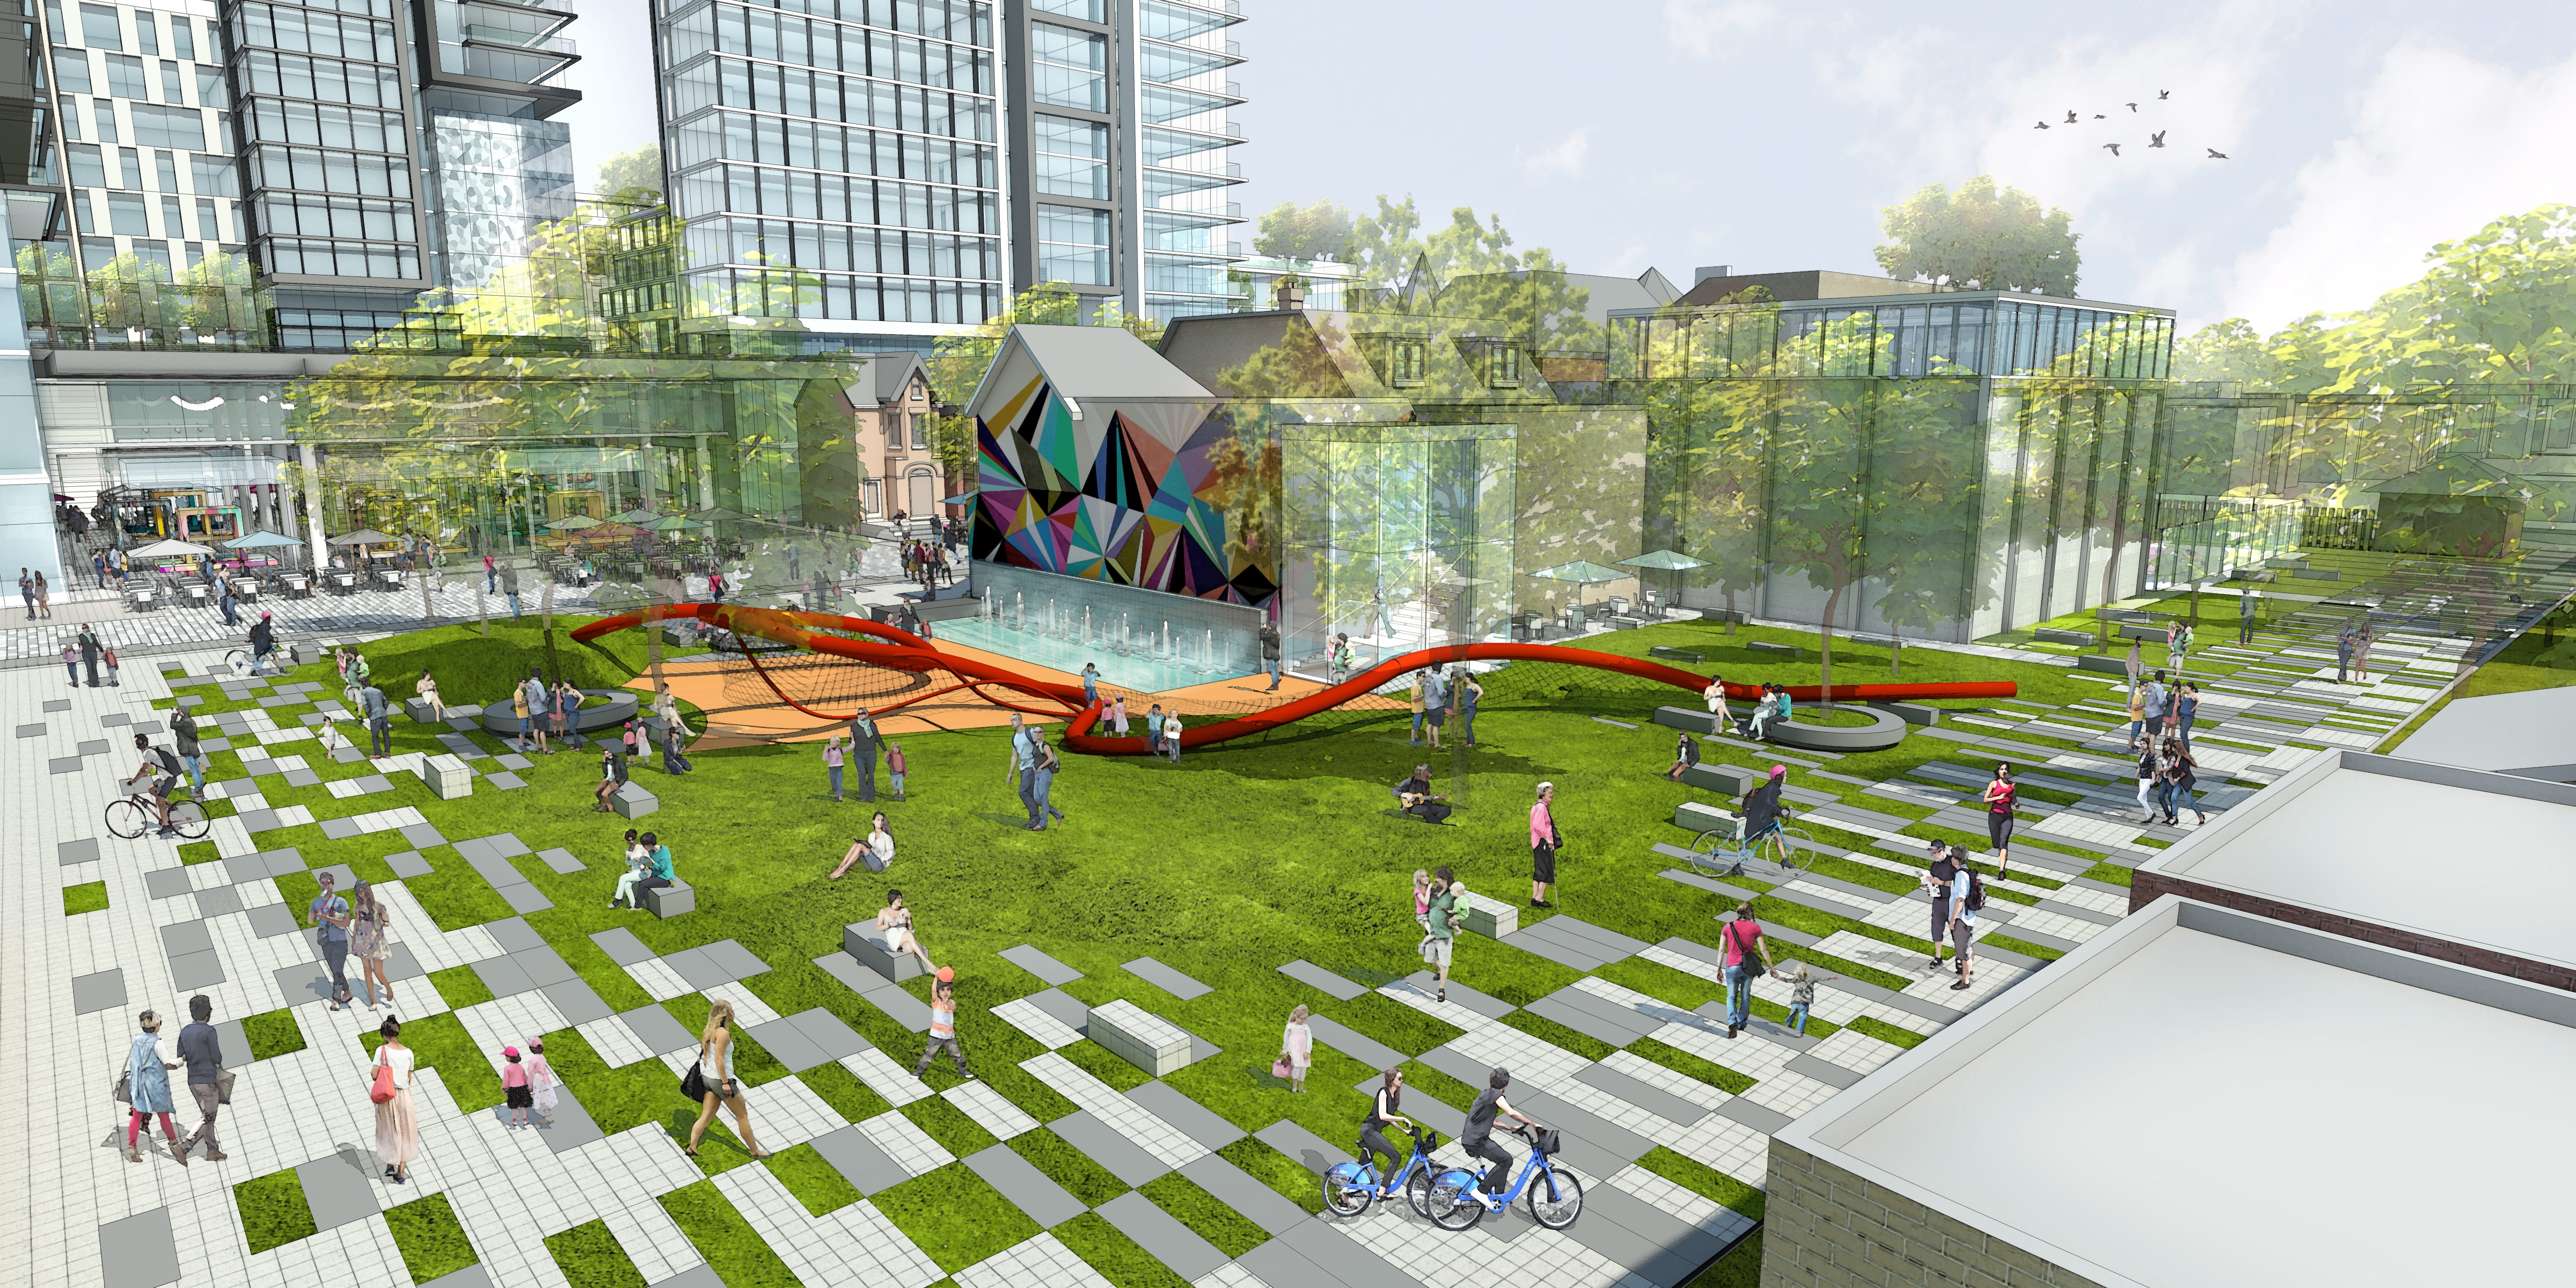 Bloor and Bathurst redevelopment rendering of a park